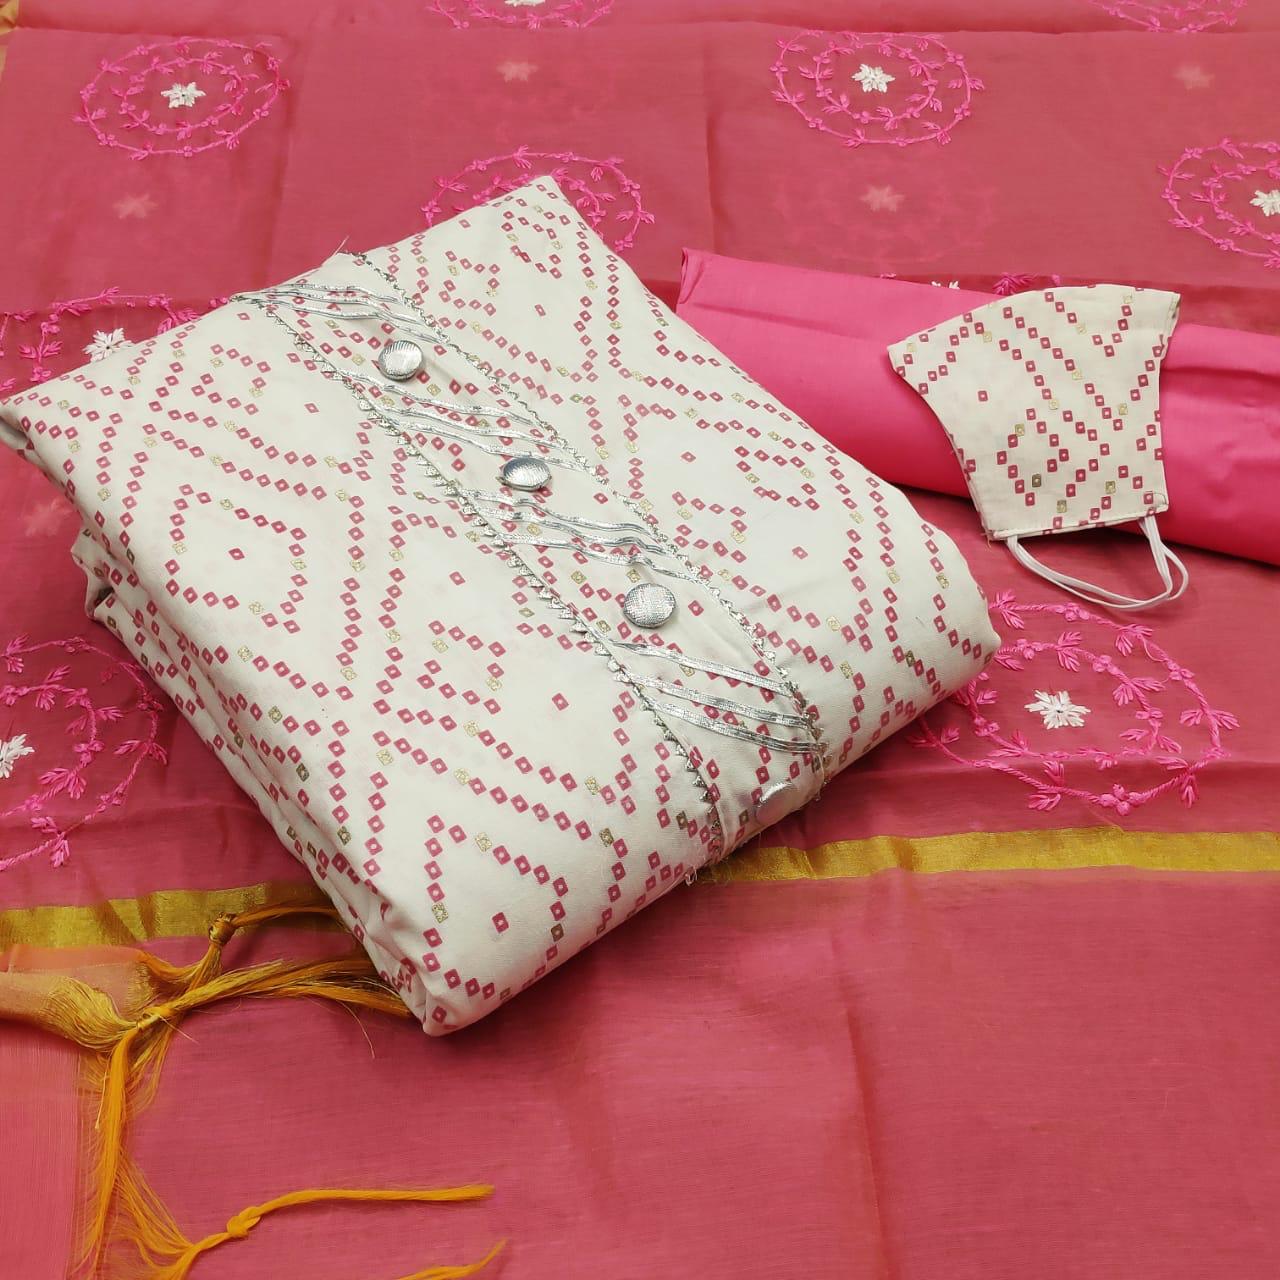 Latest Cotton Bandhani Print With Embroidery Work With Match...